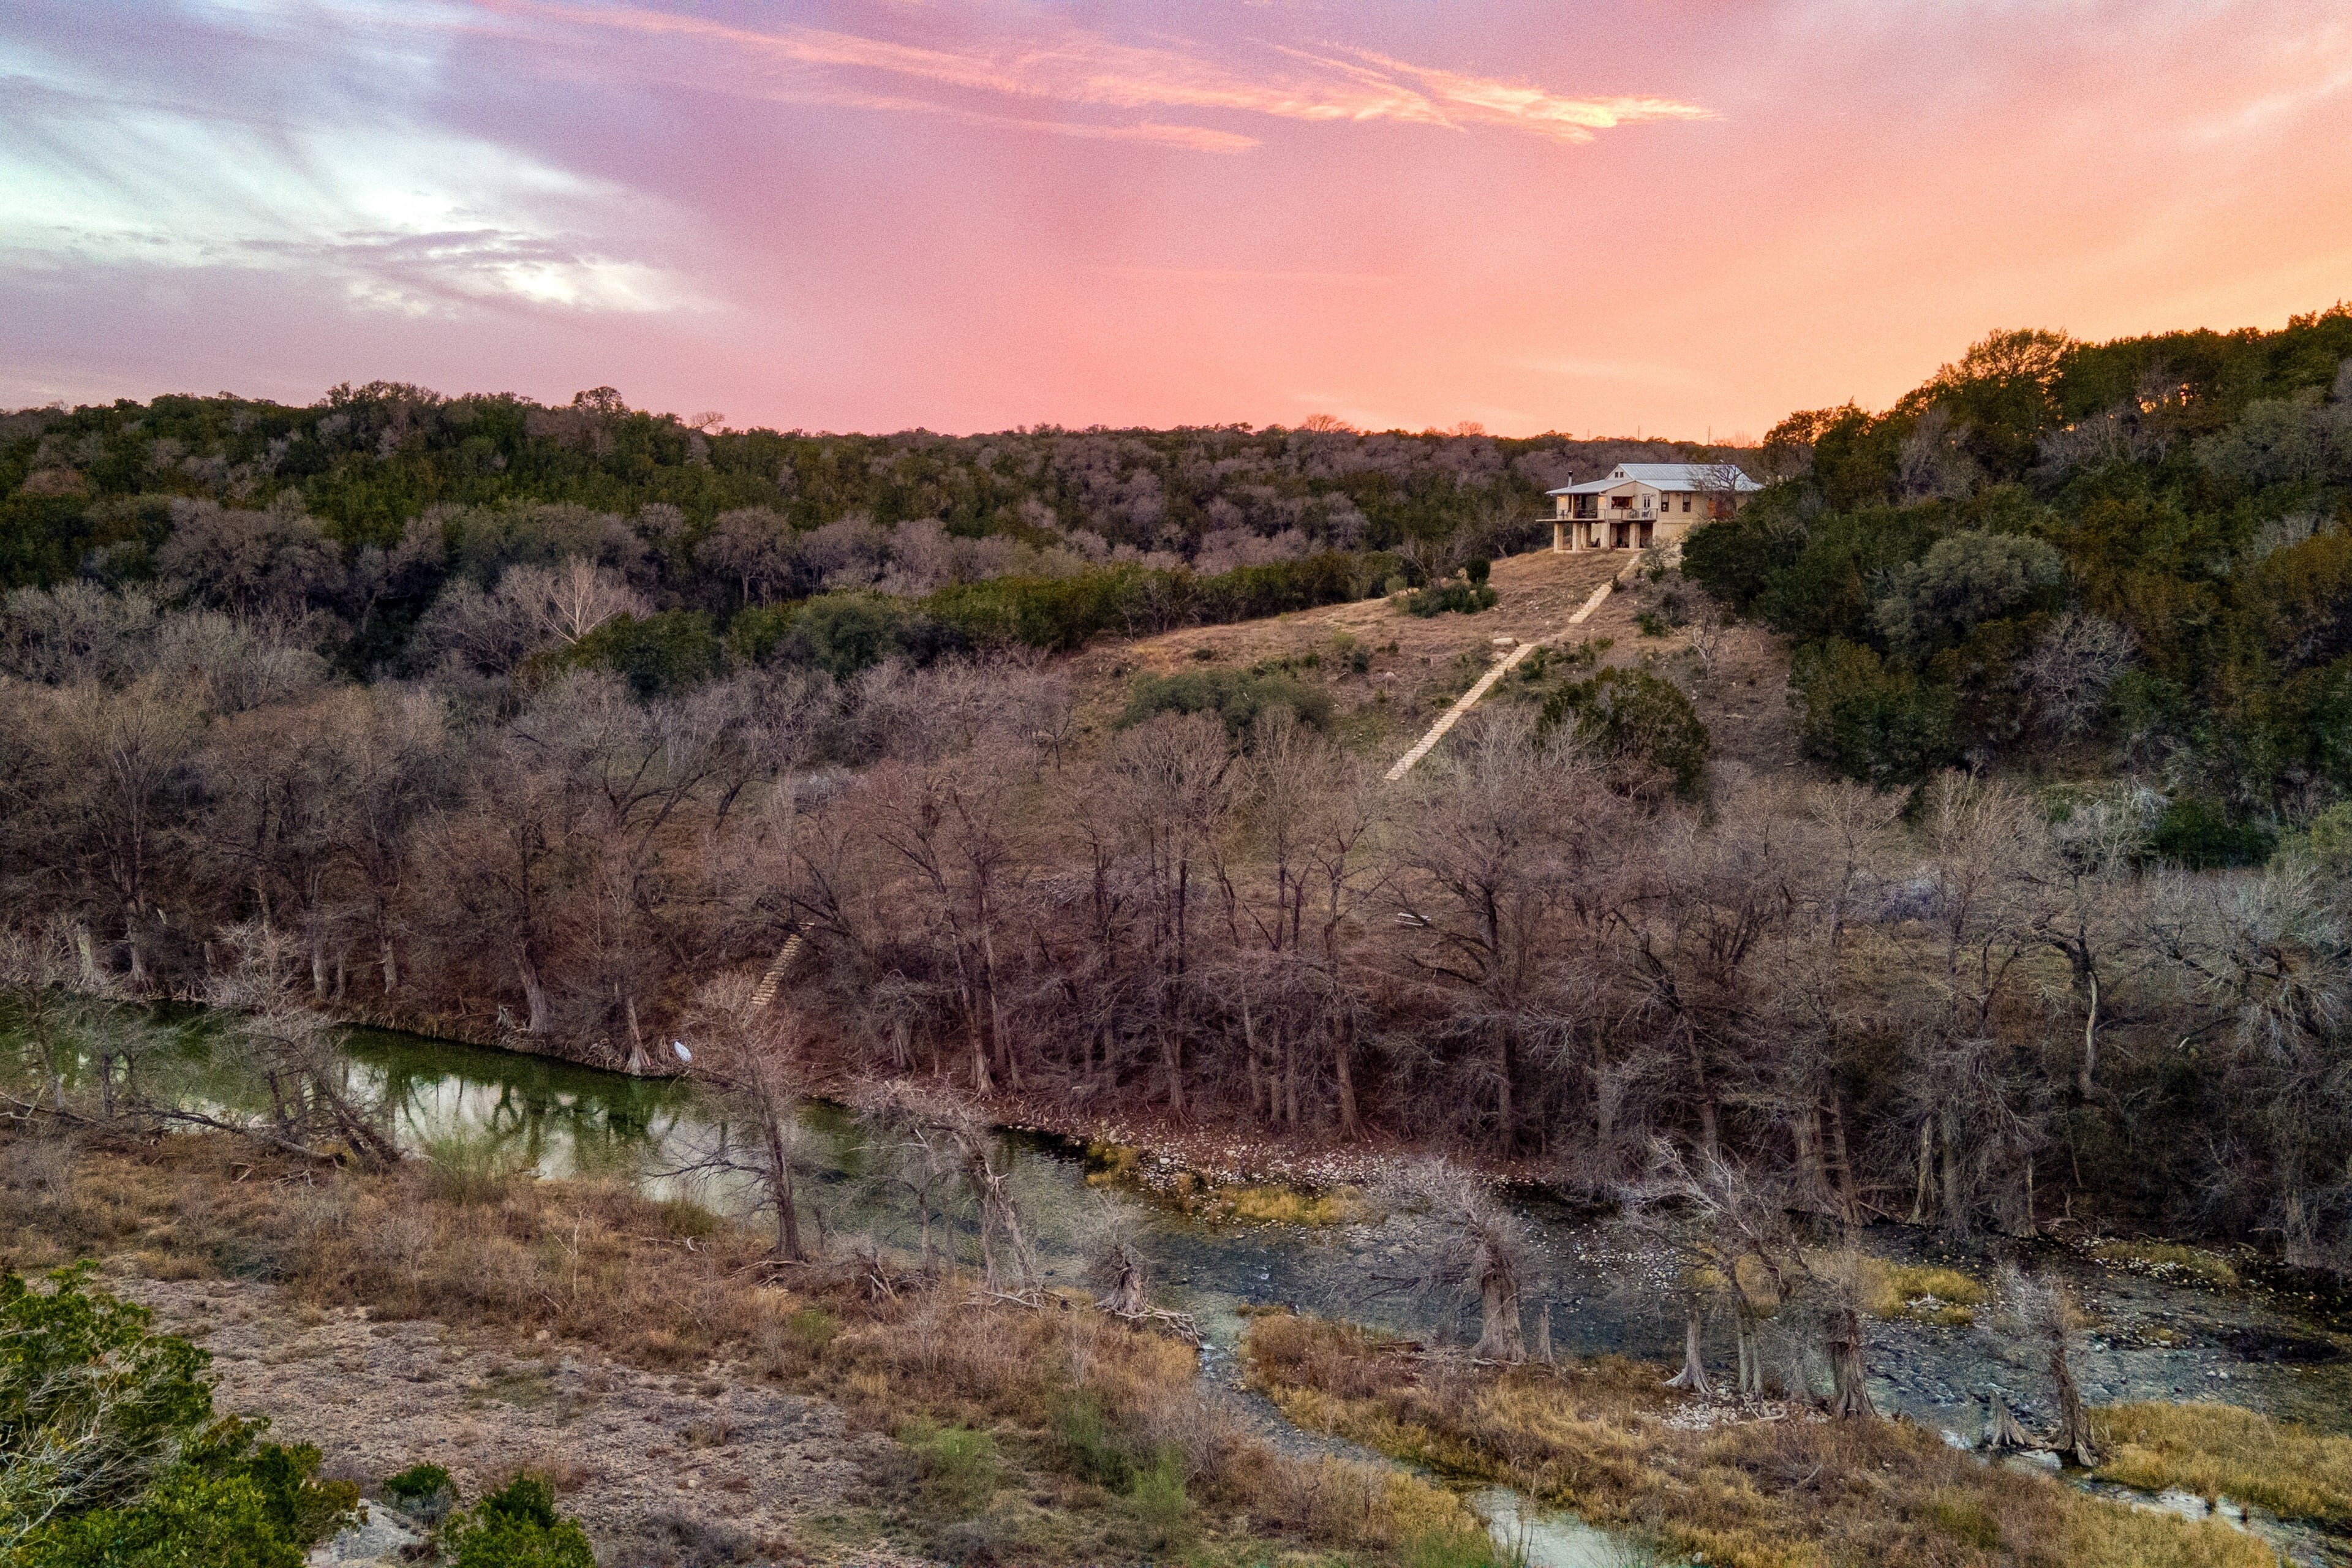 Your private getaway, located right on the Pedernales River.